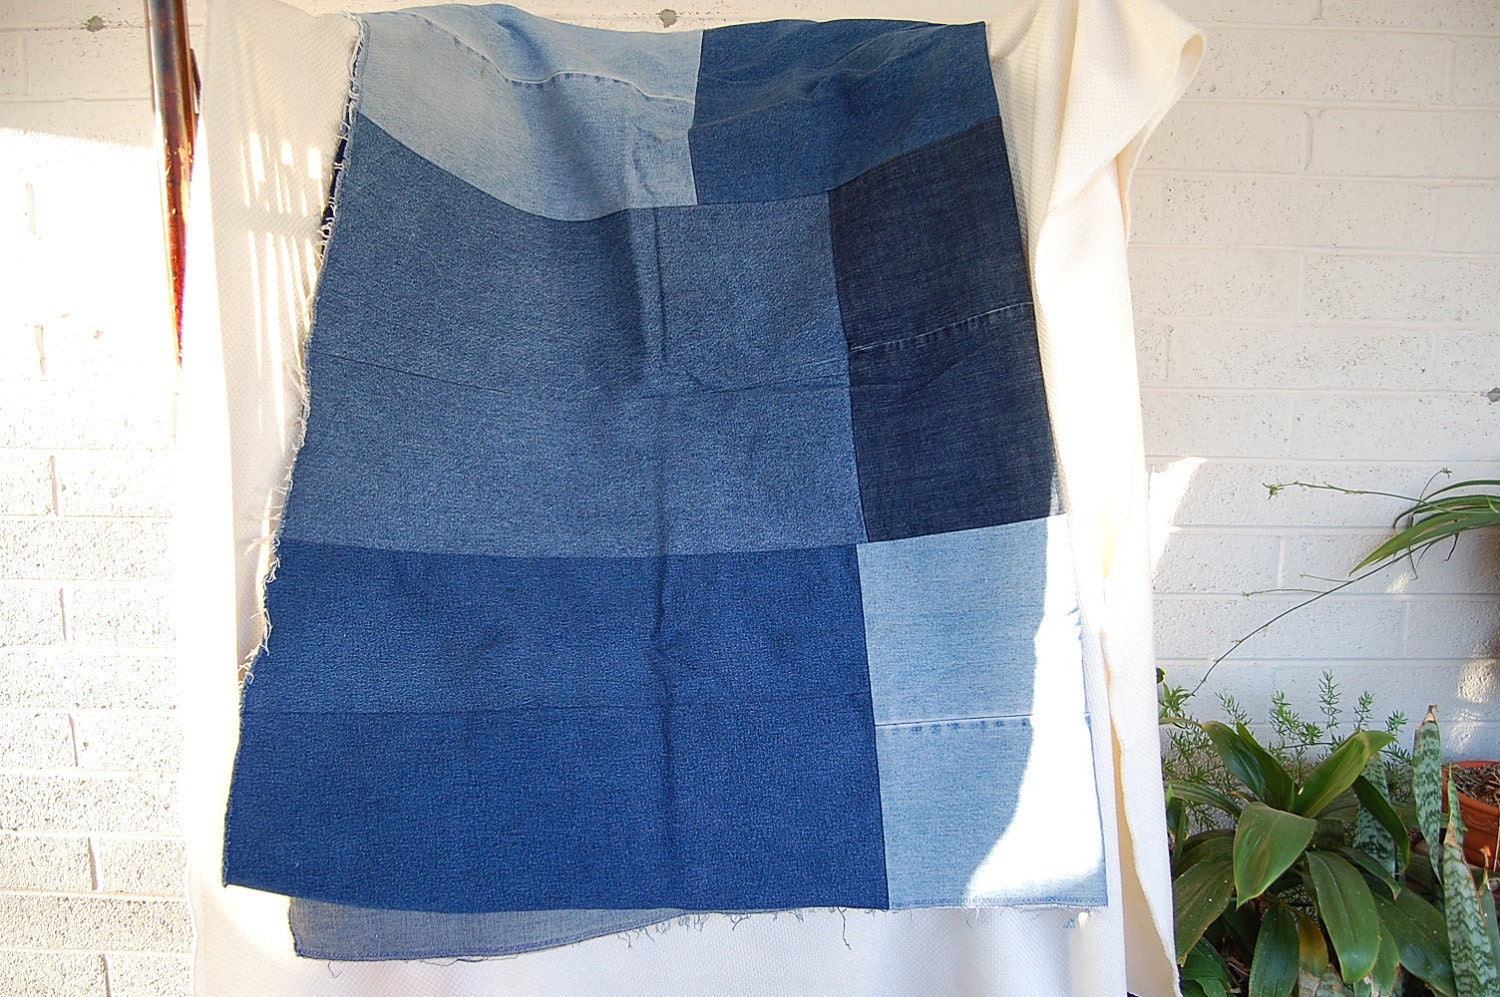 Recycled Jeans Lap Blanket 66 X 44 inches Concert Seating Camping or Great for a Dog Blanket